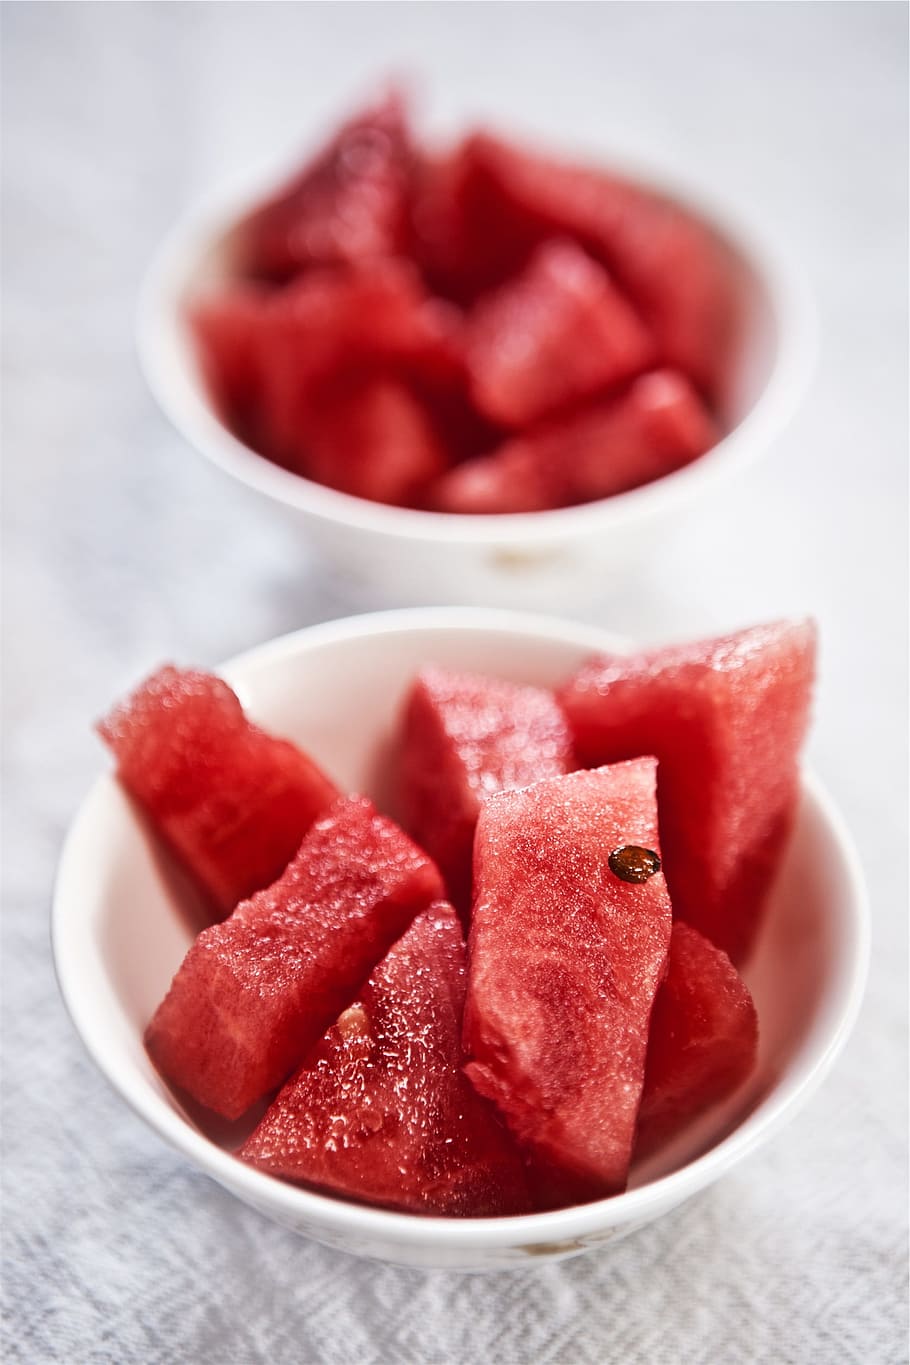 watermelon, fruits, food, healthy, bowl, food and drink, freshness, red, fruit, healthy eating